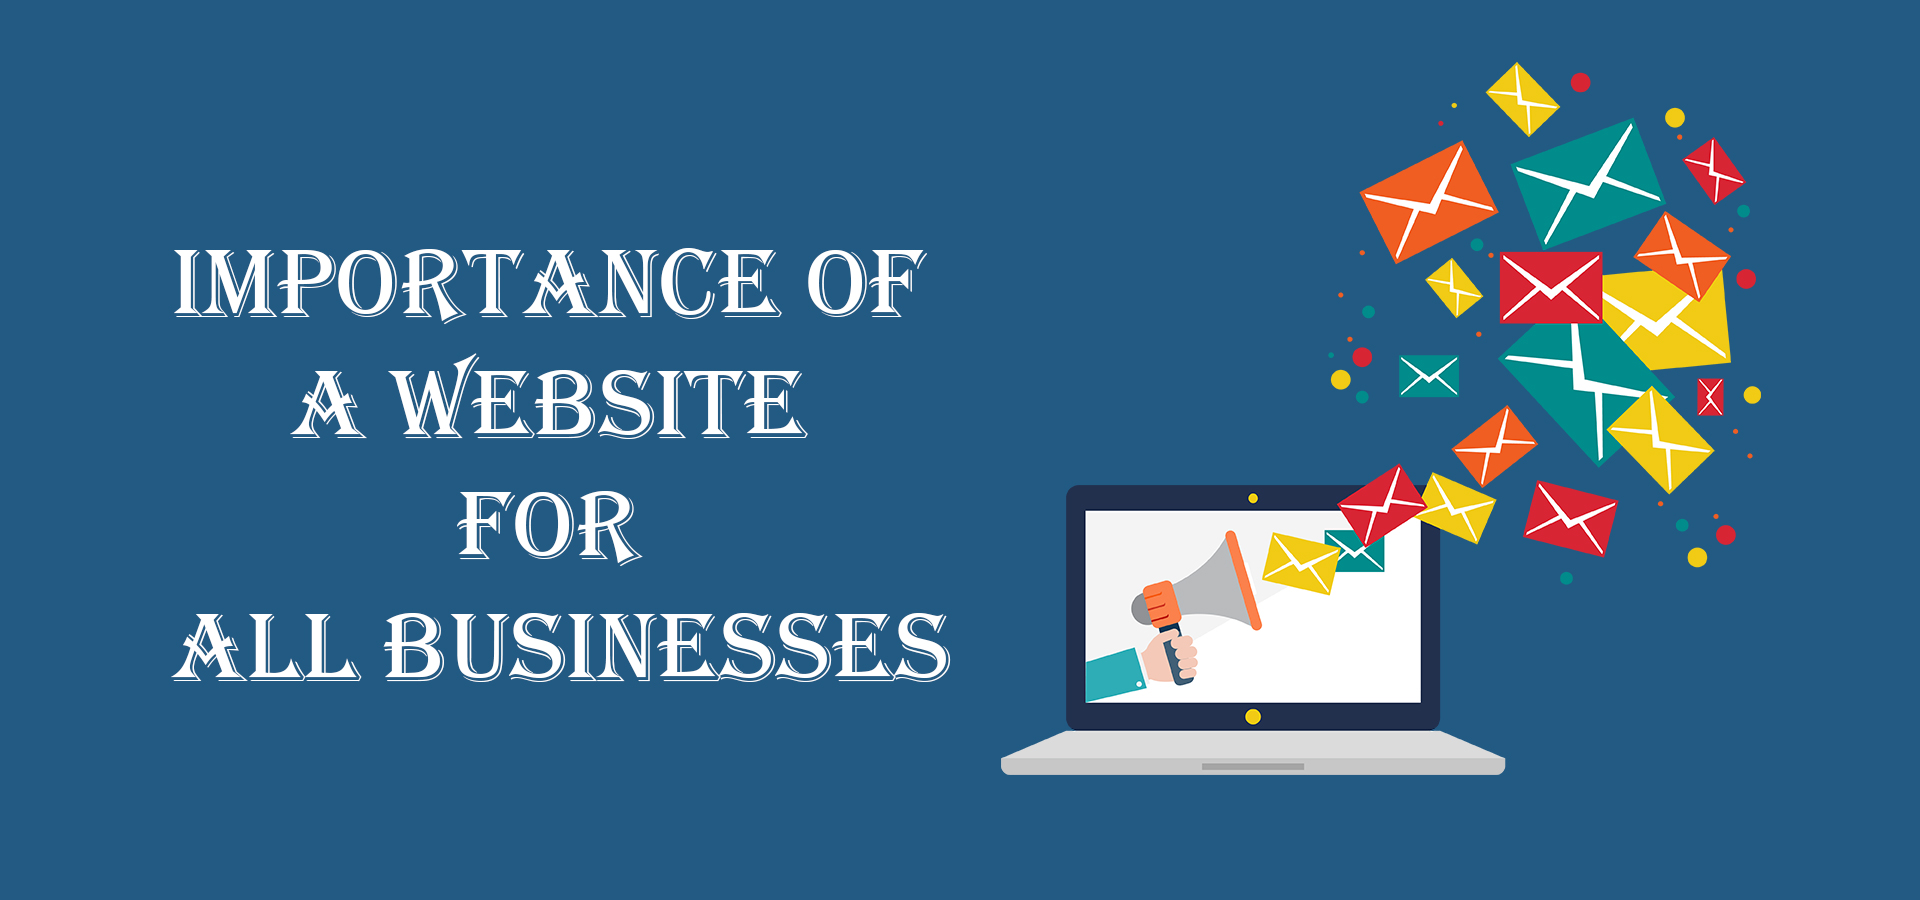 Benefits of website for your businesses